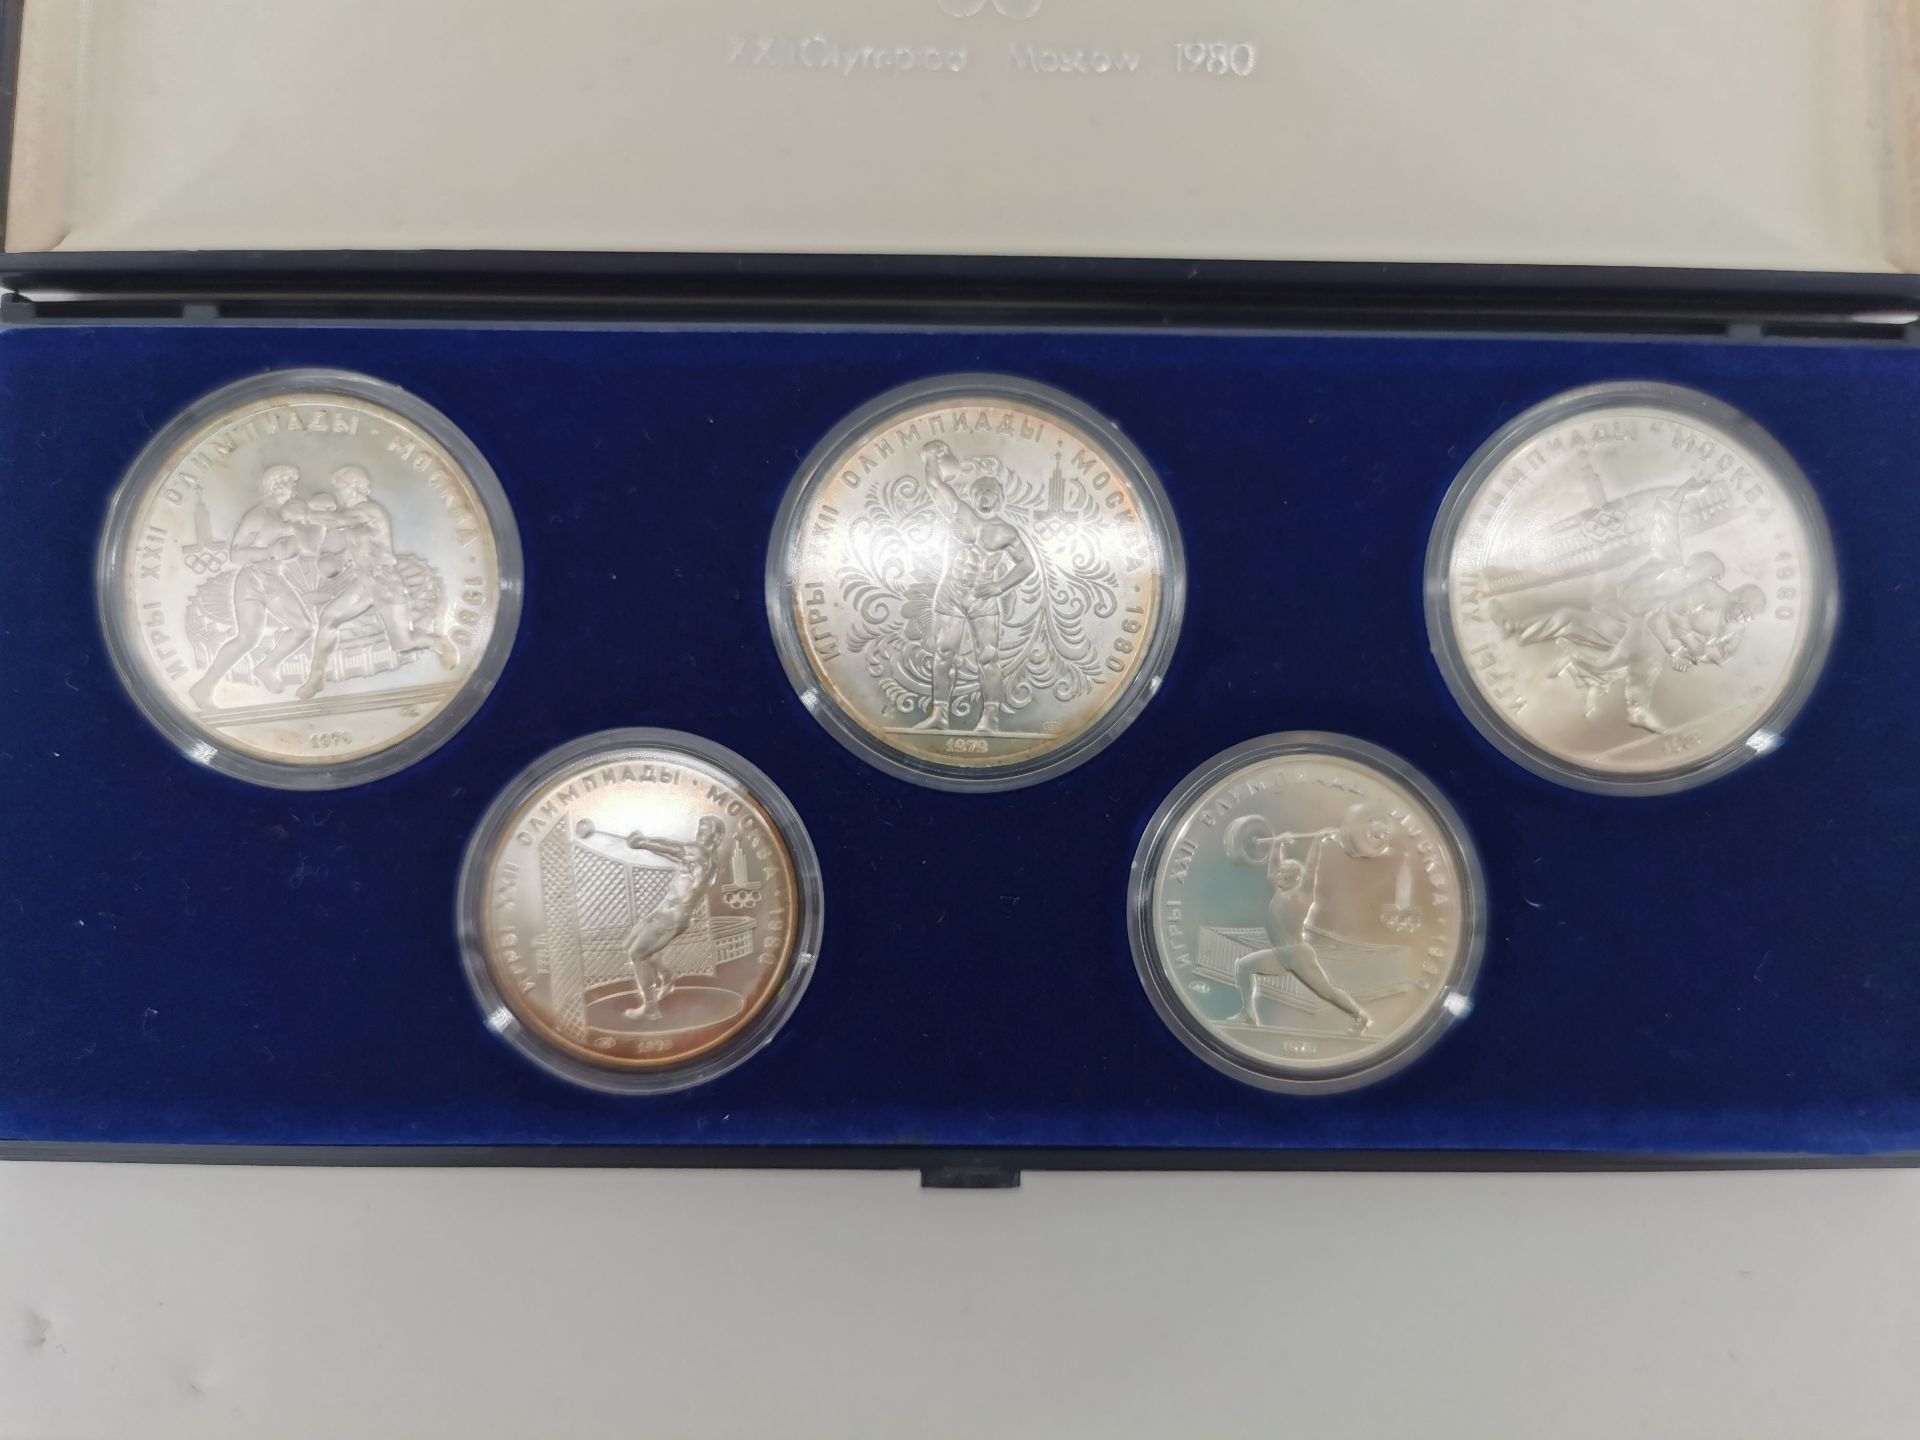 OLYMPIC GAMES COIN SET - 5 COINS - Image 2 of 4